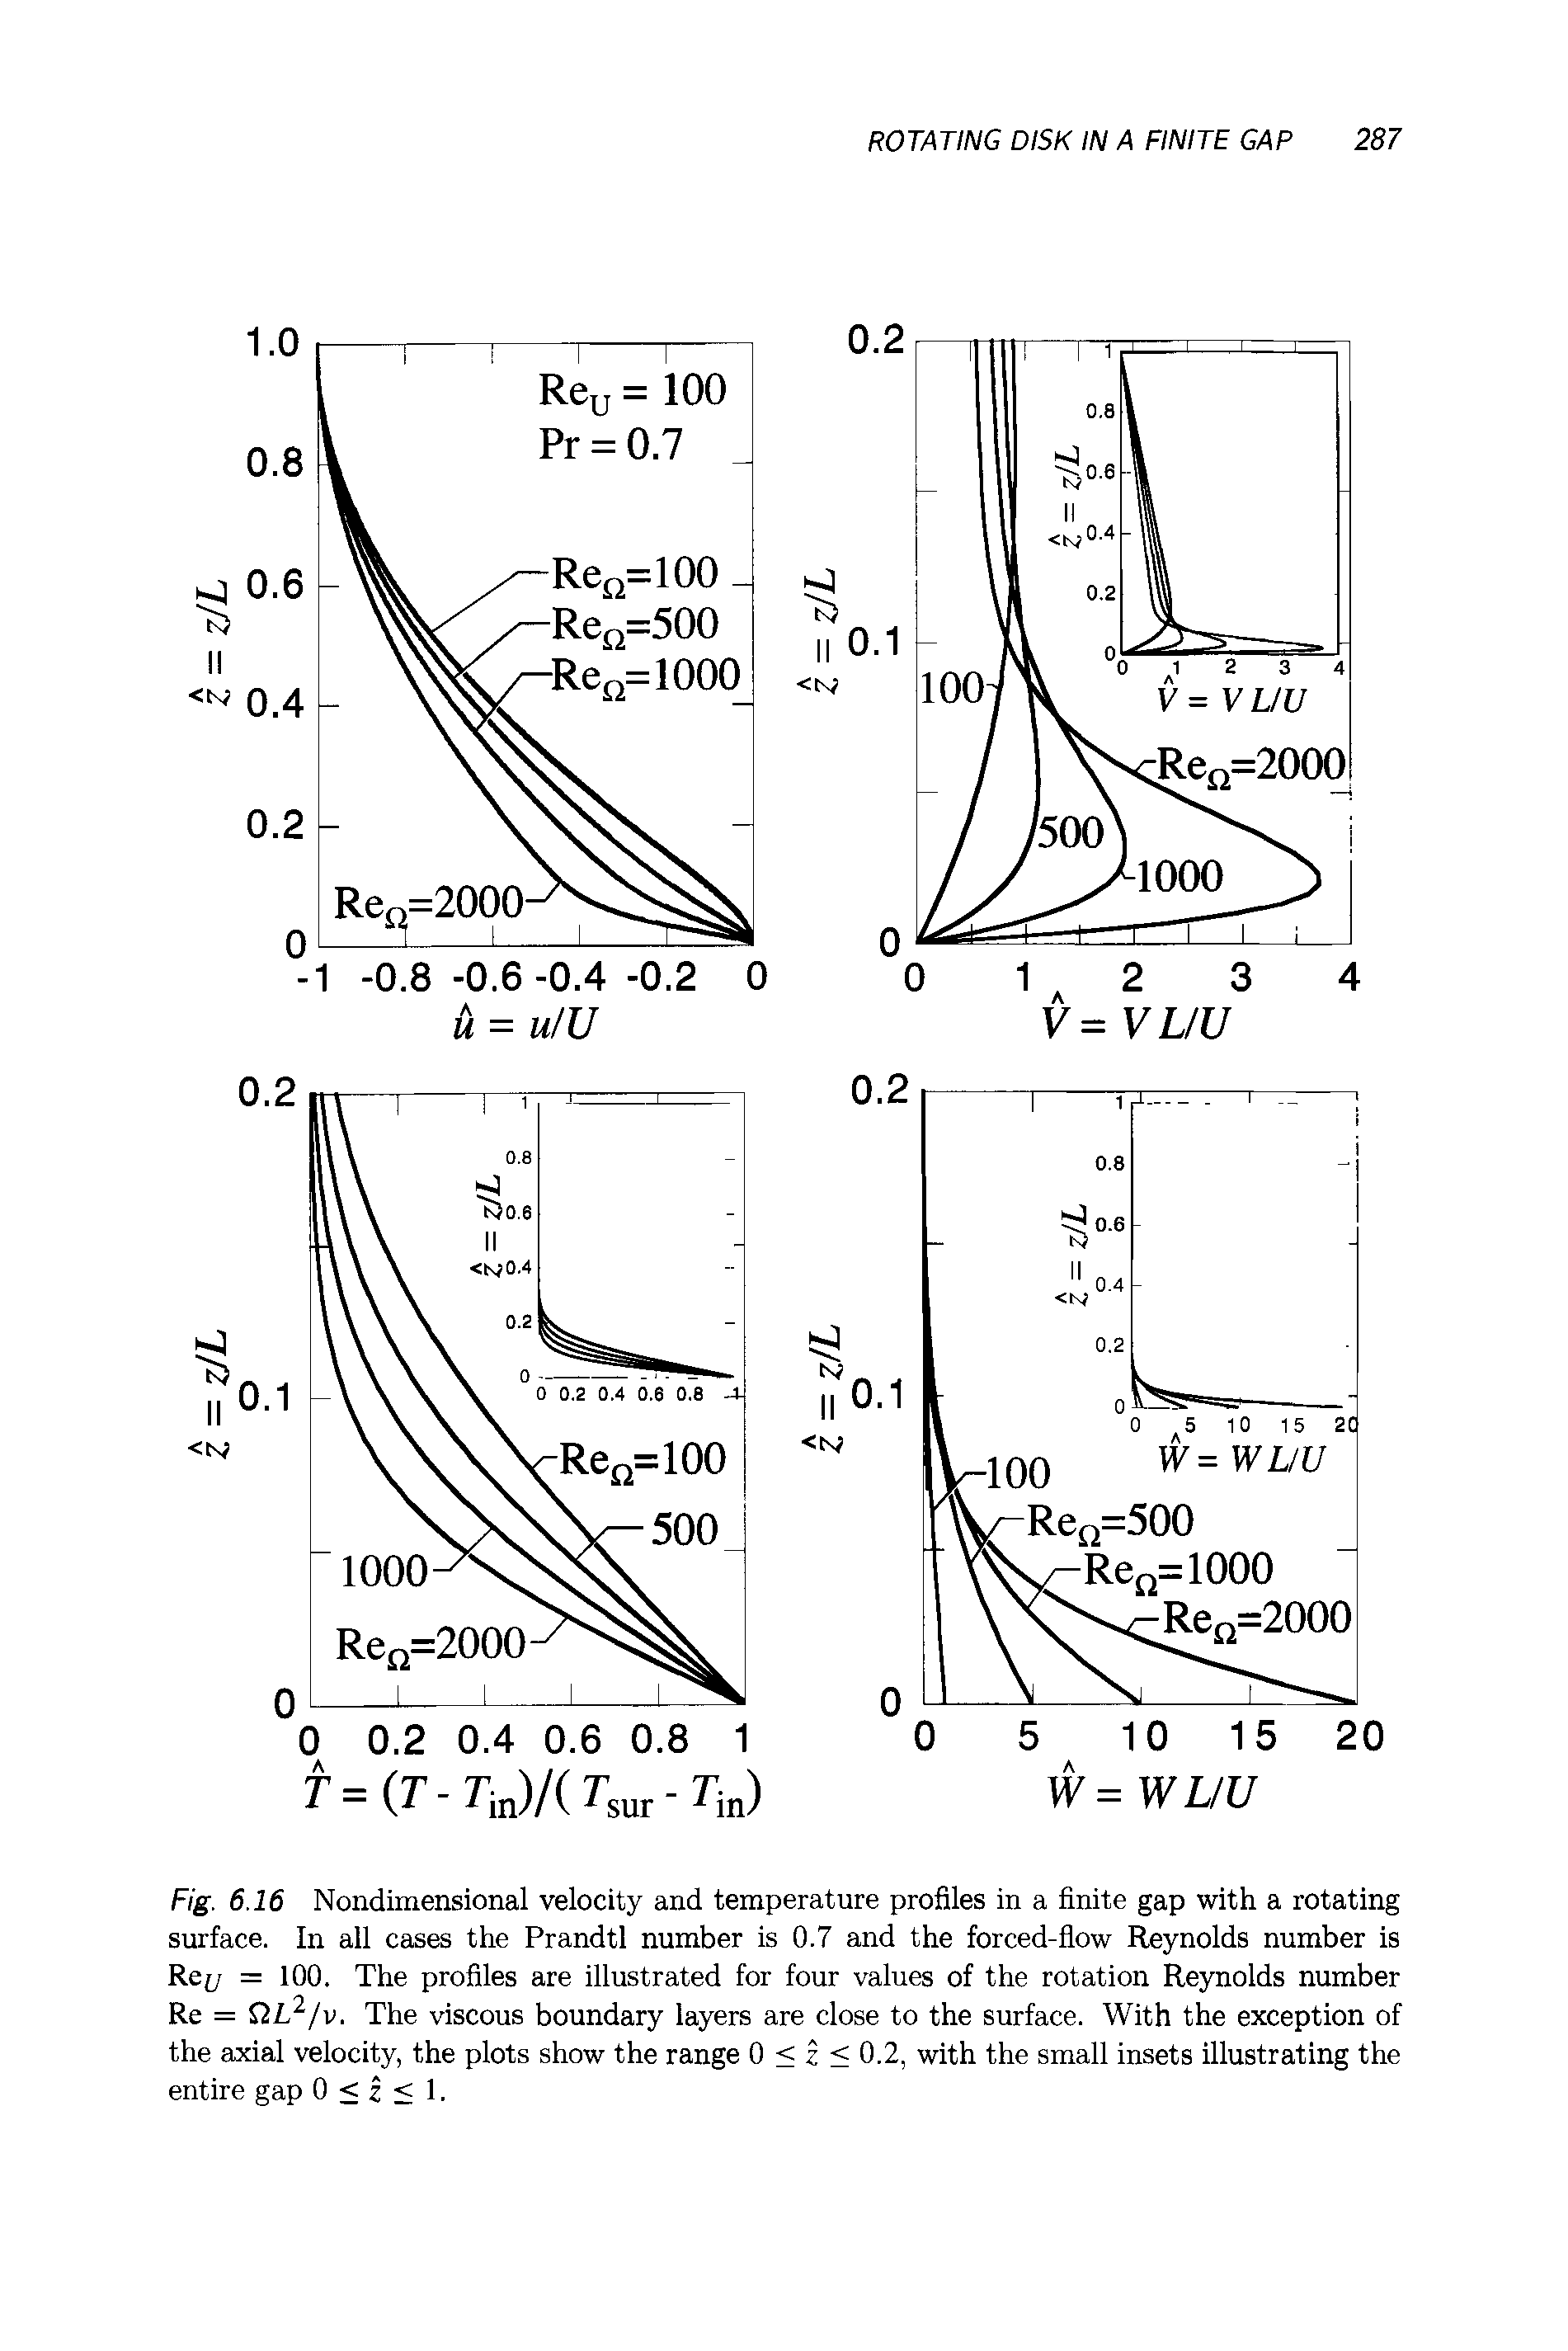 Fig. 6.16 Nondimensional velocity and temperature profiles in a finite gap with a rotating surface. In all cases the Prandtl number is 0.7 and the forced-flow Reynolds number is Rey = 100. The profiles are illustrated for four values of the rotation Reynolds number Re = G1L2/v. The viscous boundary layers are close to the surface. With the exception of the axial velocity, the plots show the range 0 < z < 0.2, with the small insets illustrating the entire gap 0 < z < 1.